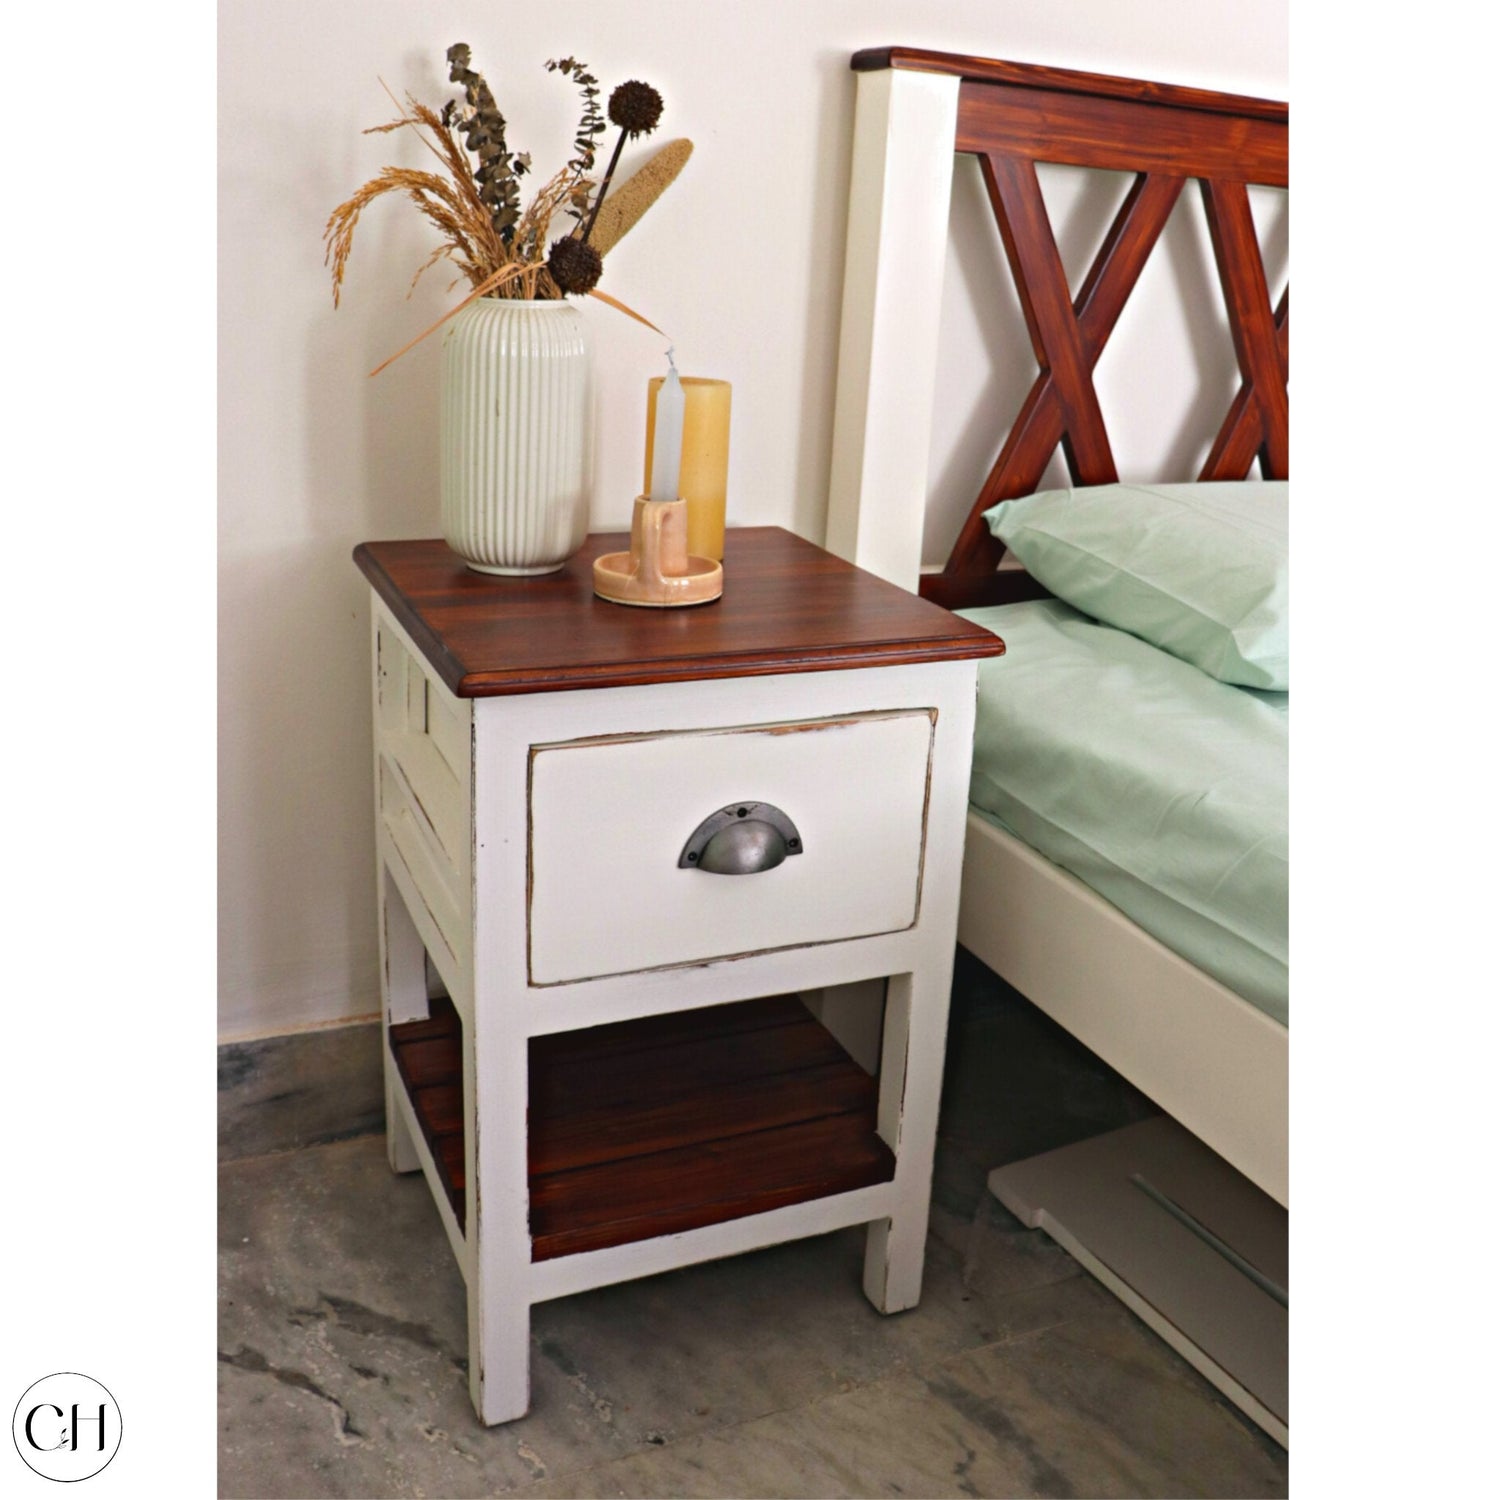 CustHum-side table collection